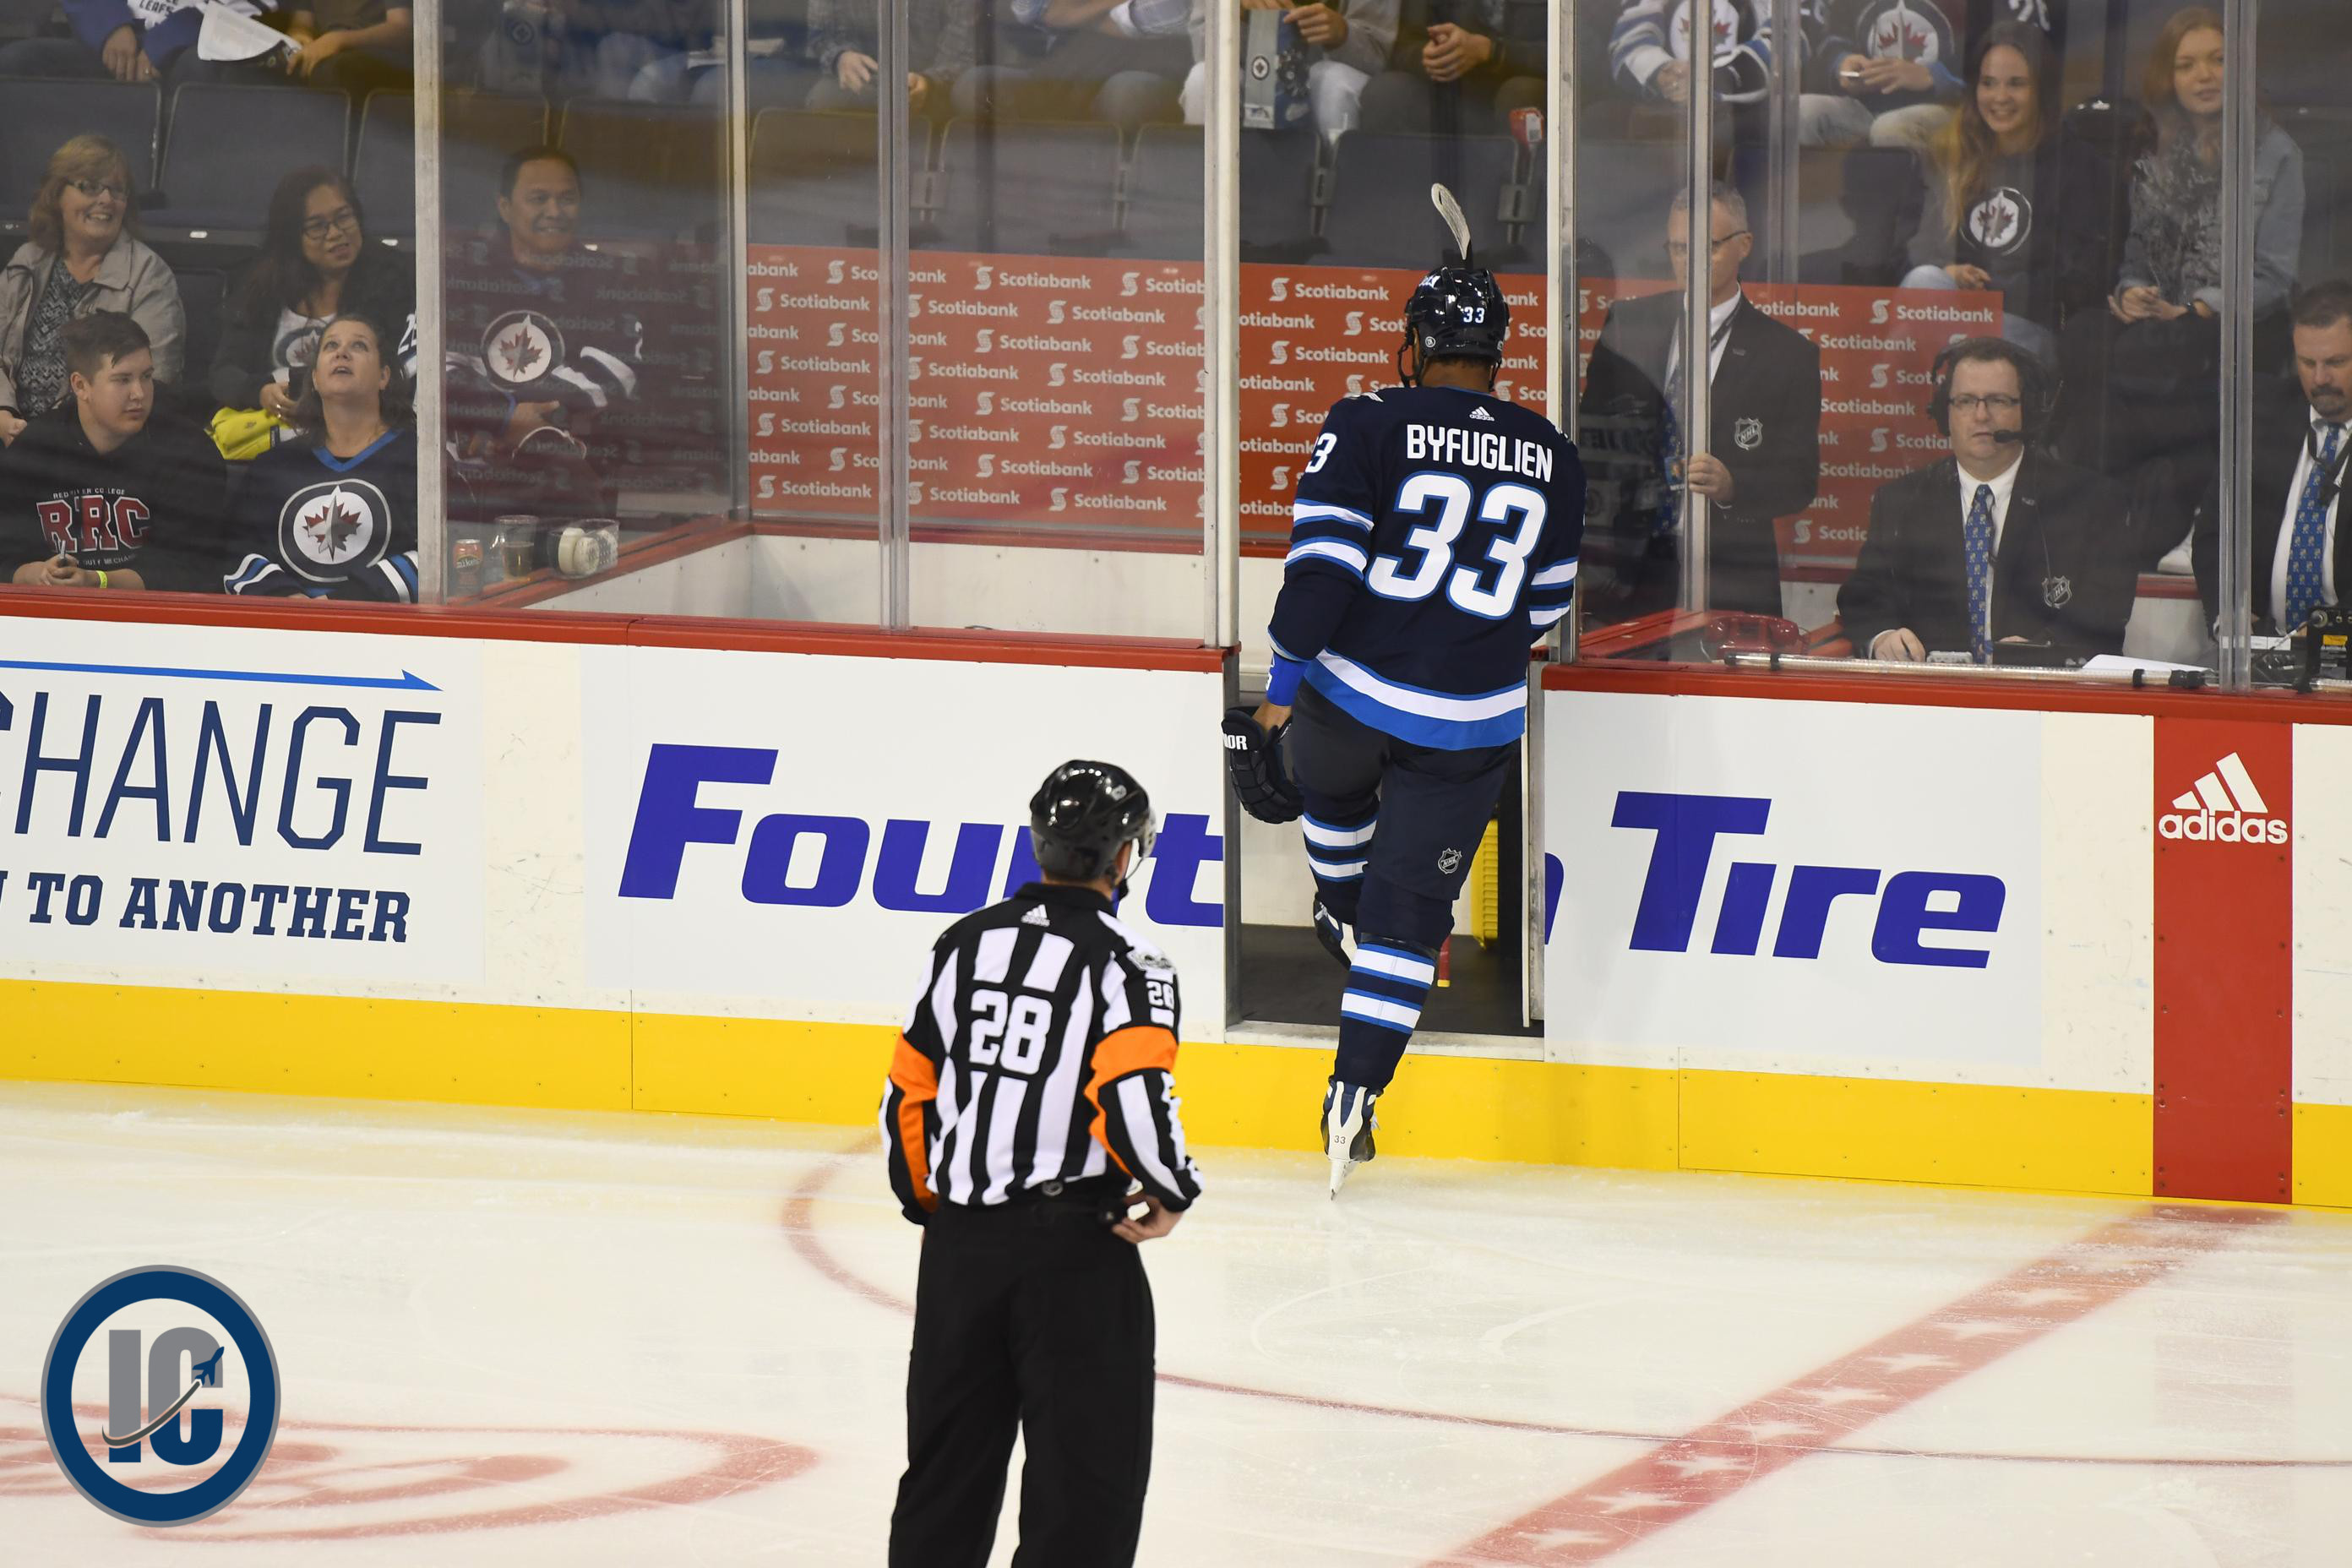 Byfuglien heading to the penalty